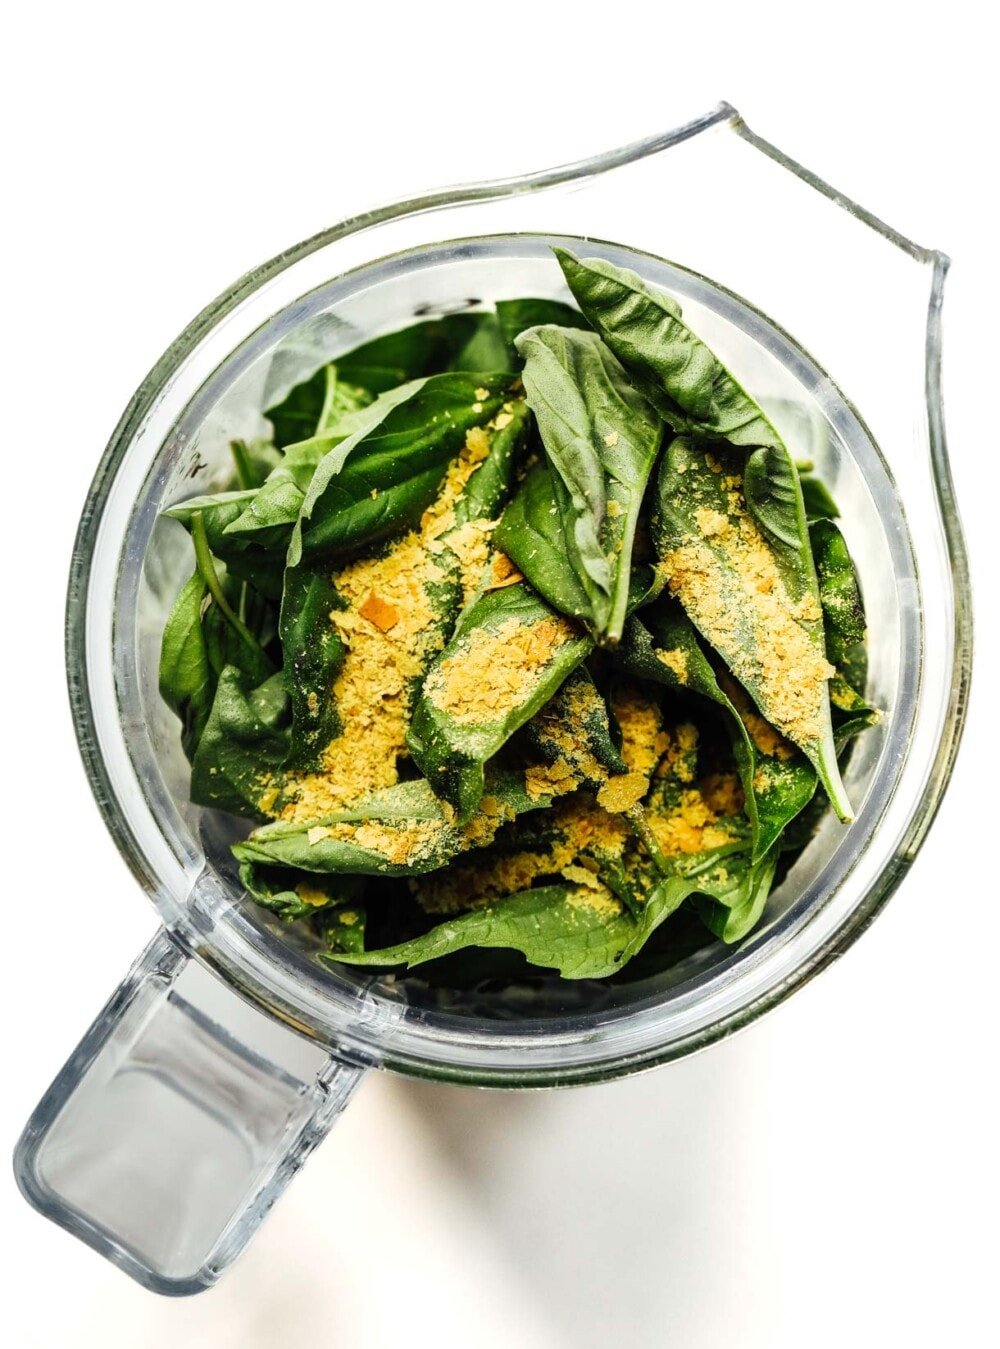 basil leaves and nutritional yeast in a blender jar